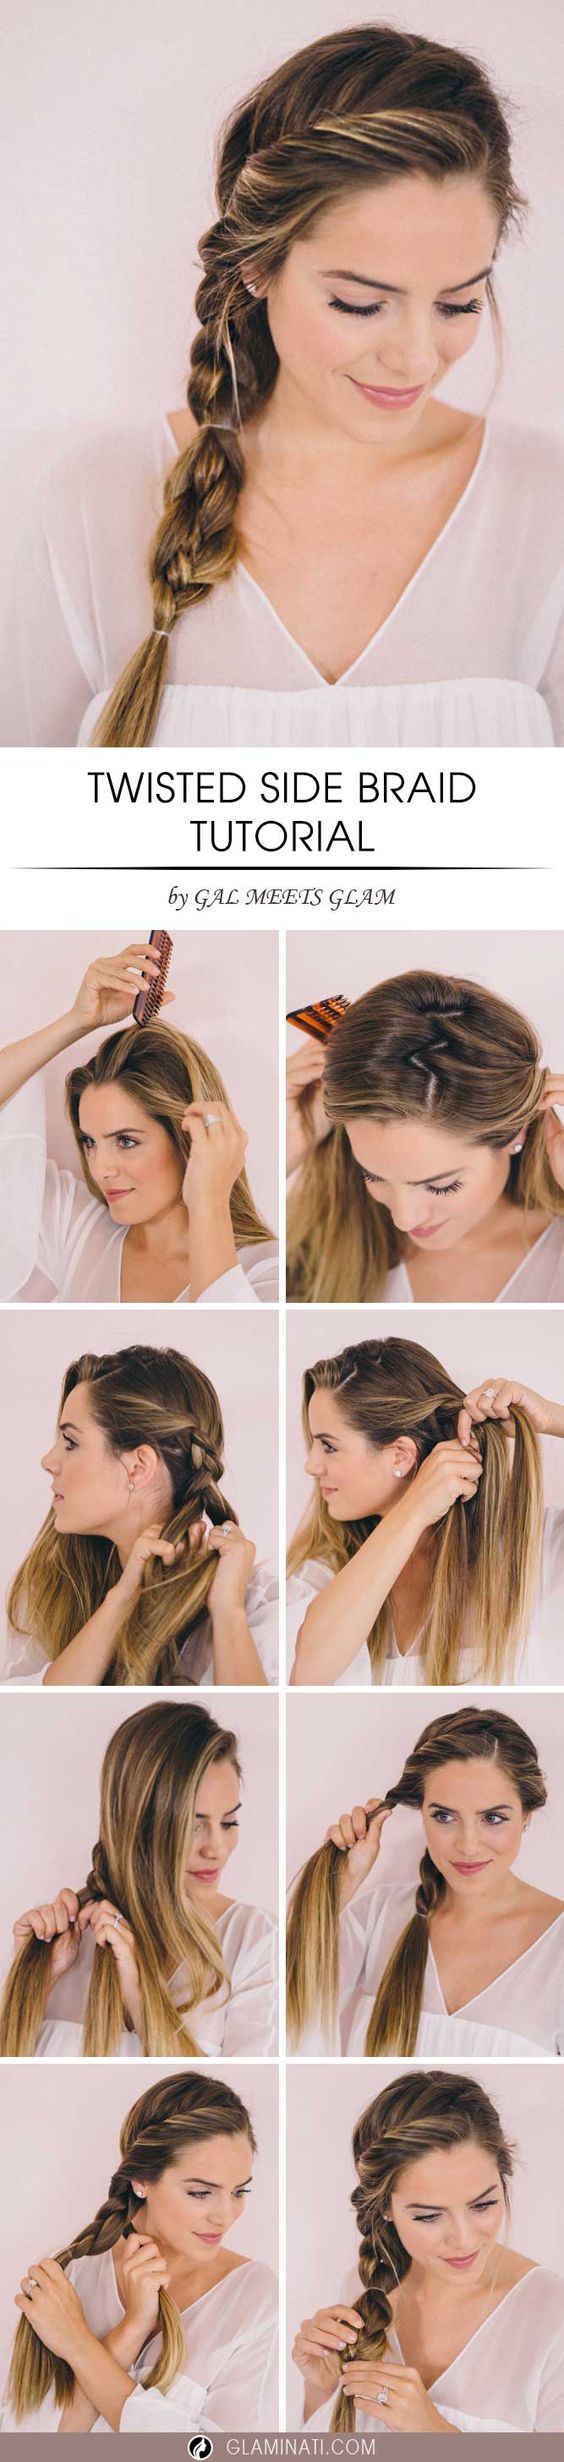  Medium Hairstyles with Twisted Side Braid 